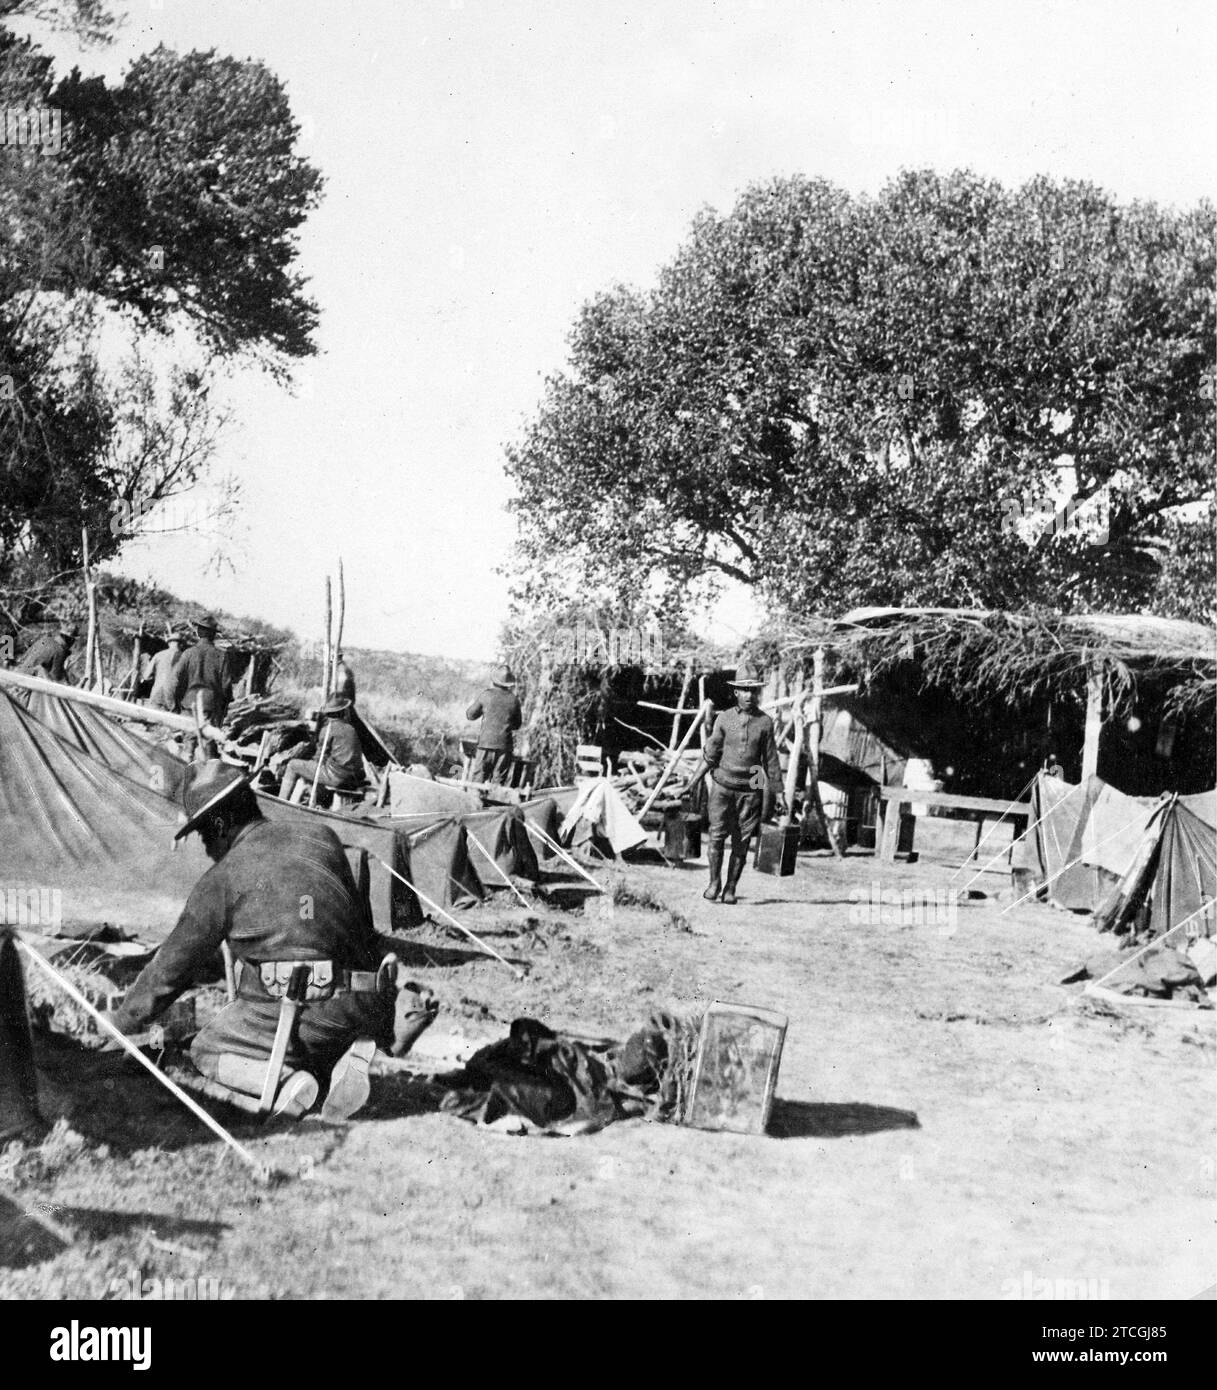 04/30/1916. North Americans in Mexico. Partial appearance of a camp of the American Troops that entered Mexico in pursuit of Pancho Villa. Credit: Album / Archivo ABC / Louis Hugelmann Stock Photo